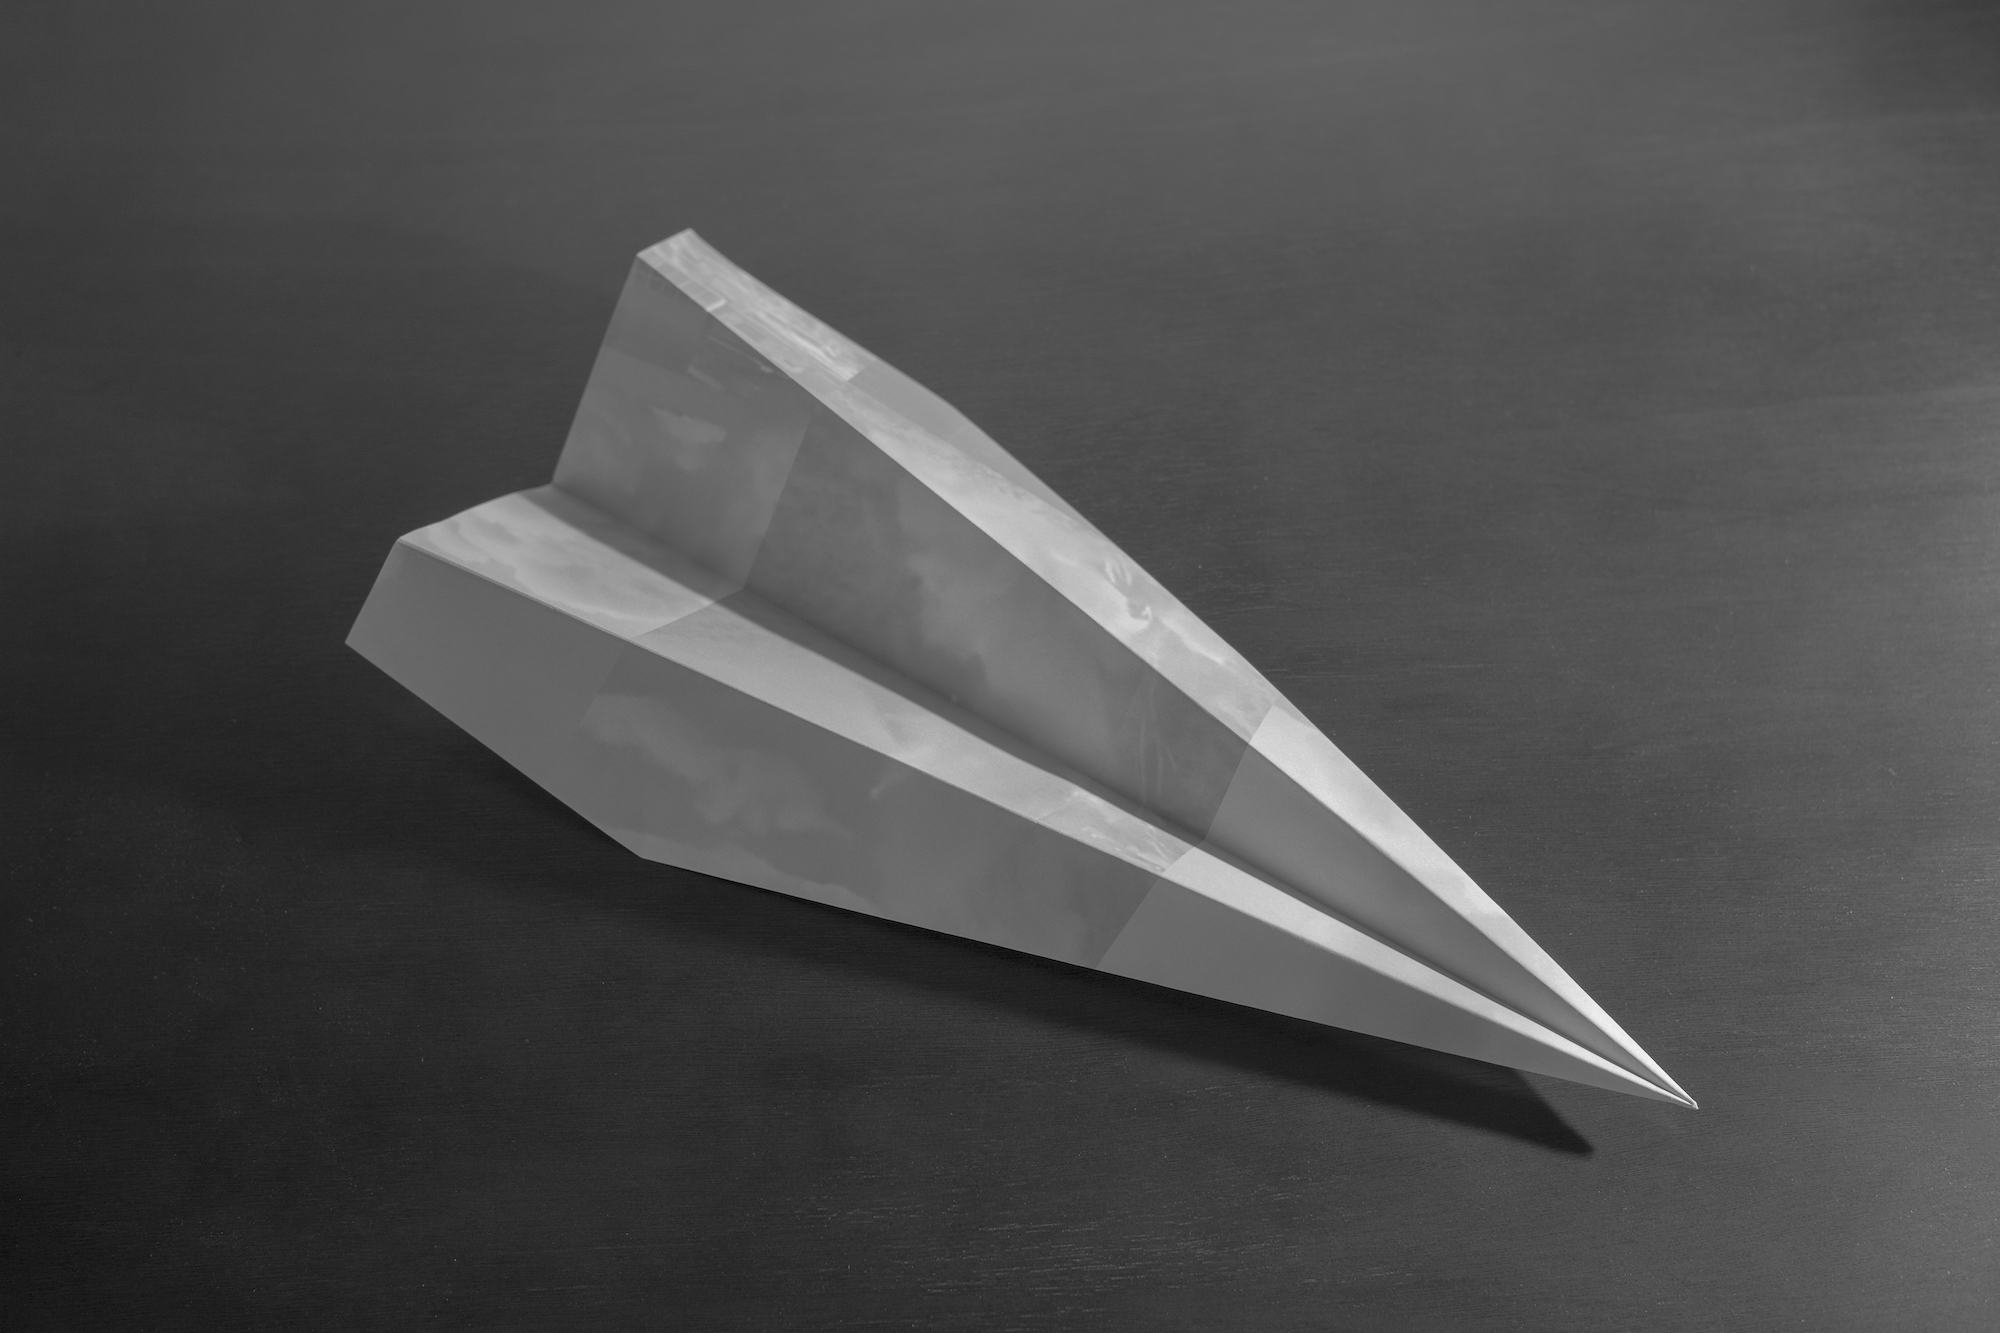 Black and white image of a paper plane, folded out of one of the collage sheets by Czar Kristoff